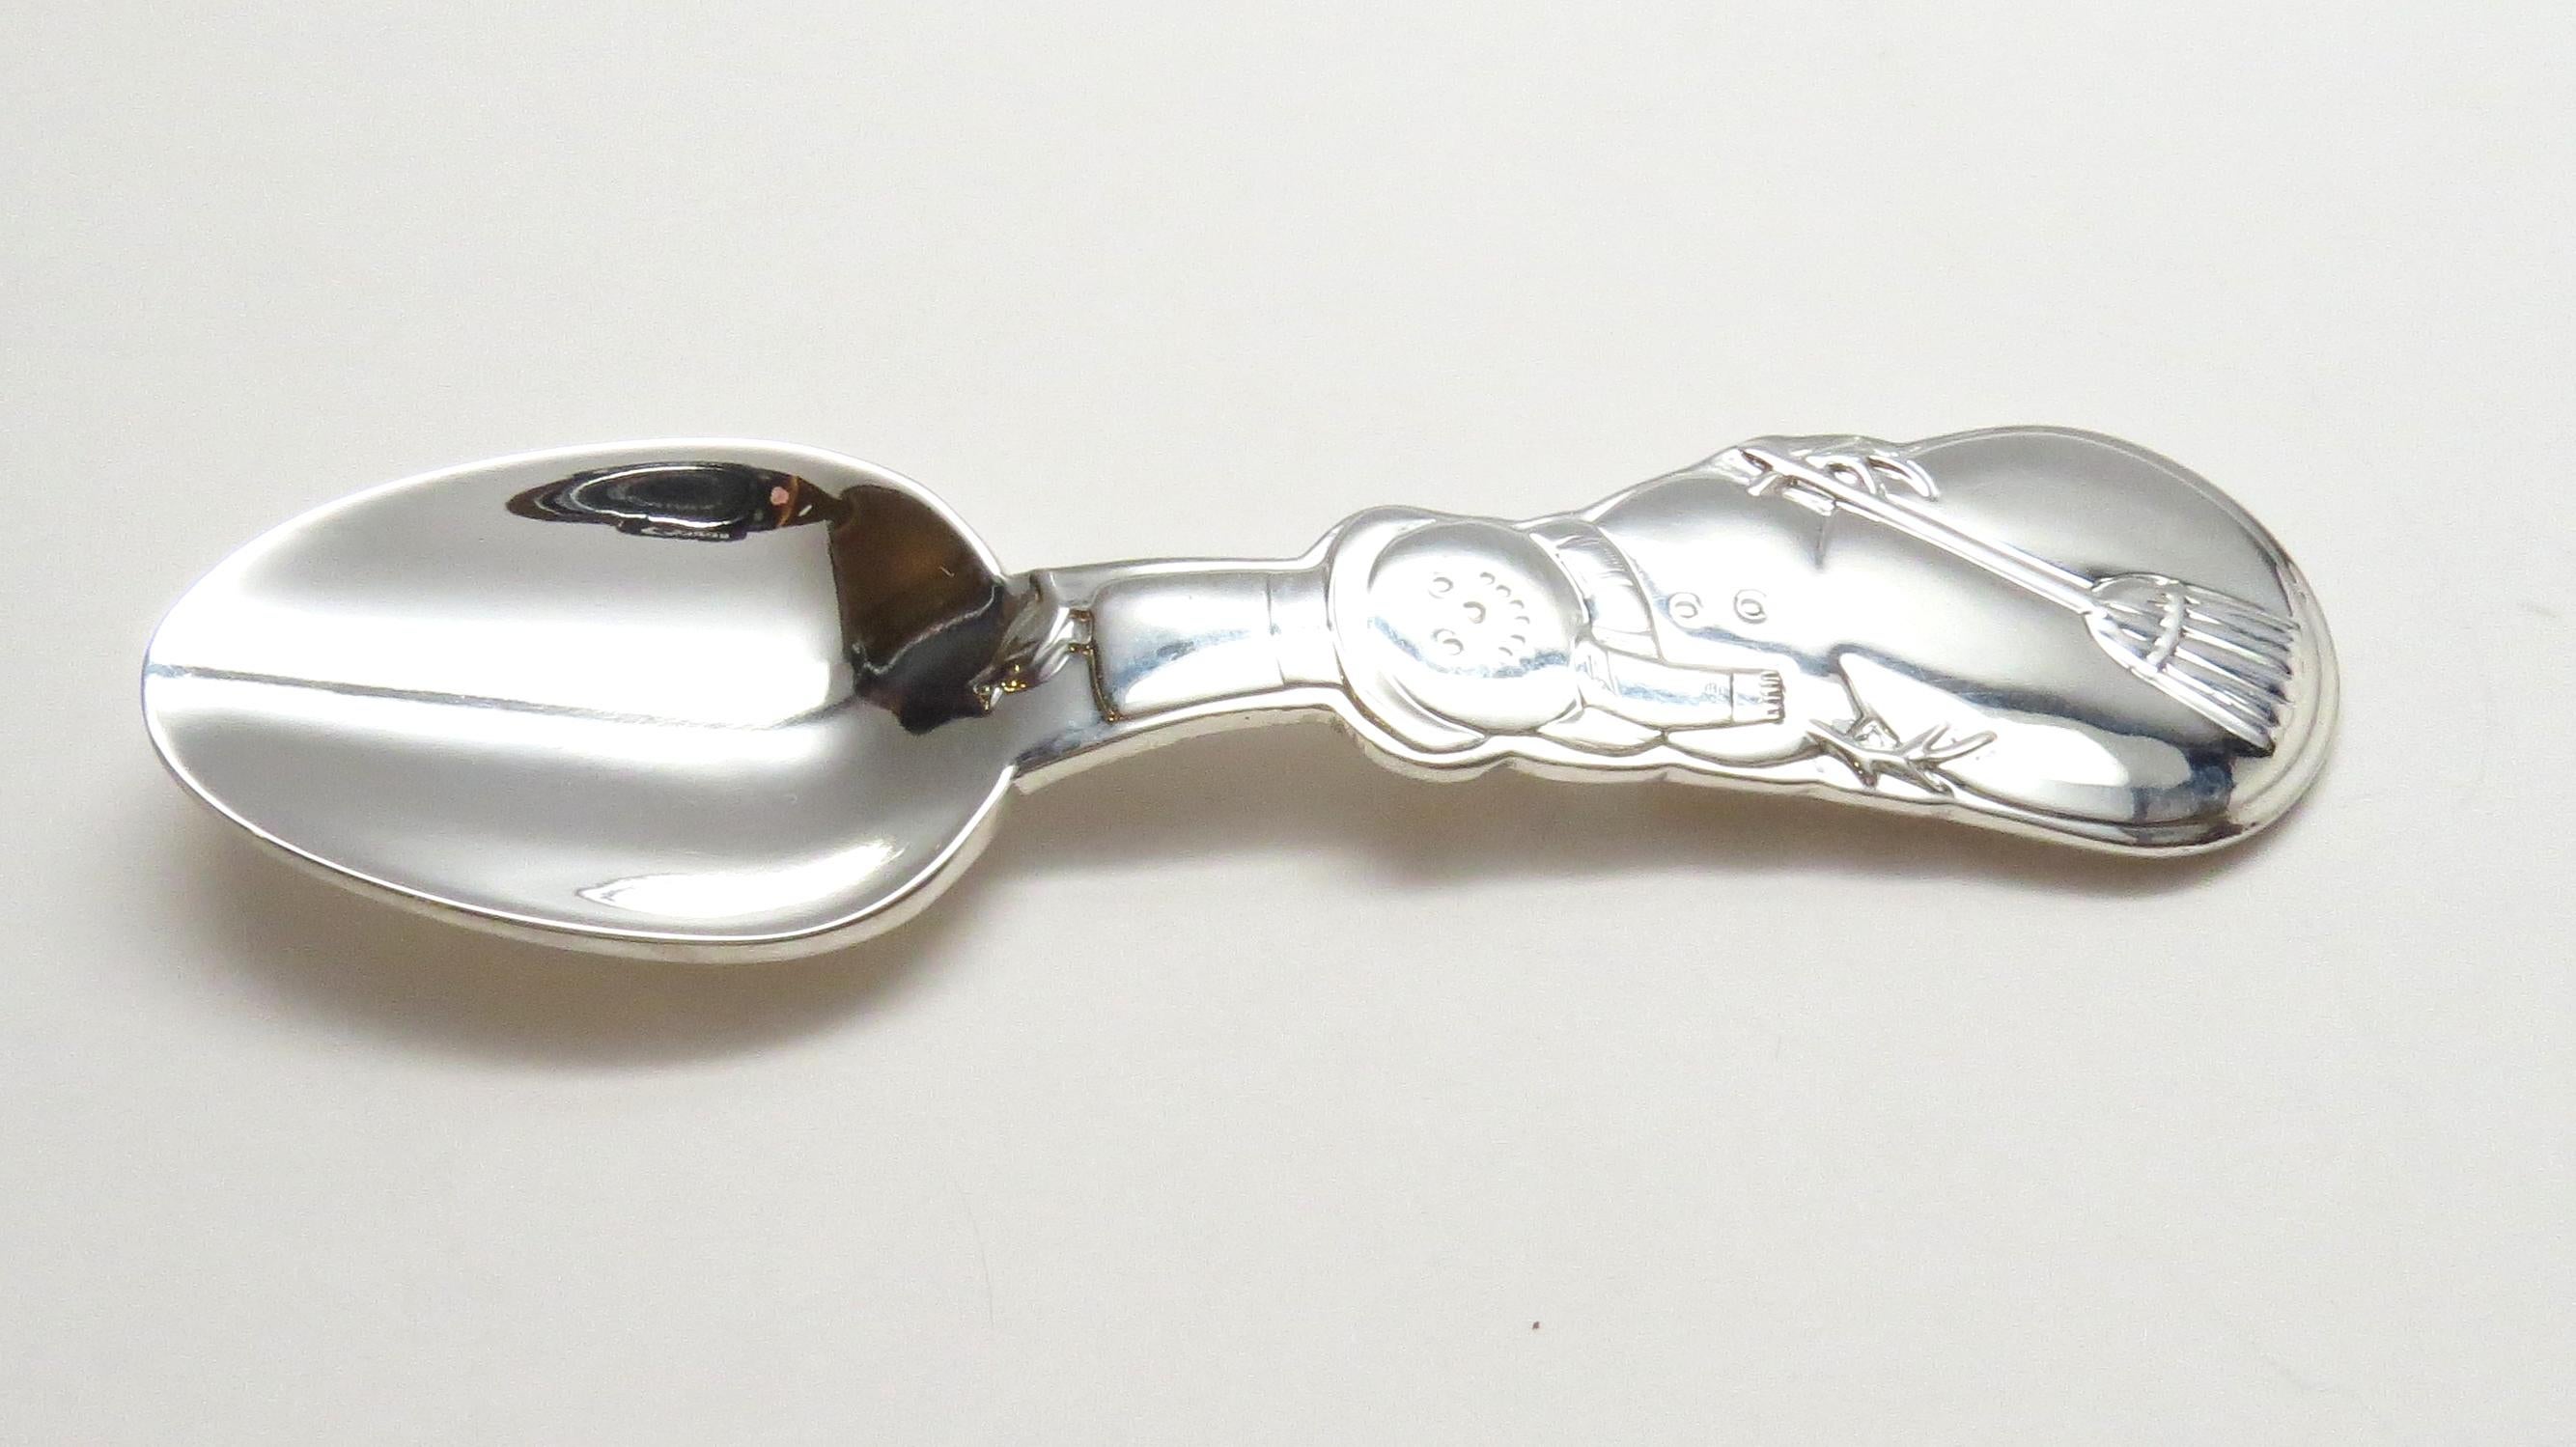 Tiffany & Co. Makers sterling silver Snowman youth spoon. Marked: TIFFANY & CO. MAKERS STERLING 925. No monogram. Measures: 4 7/8